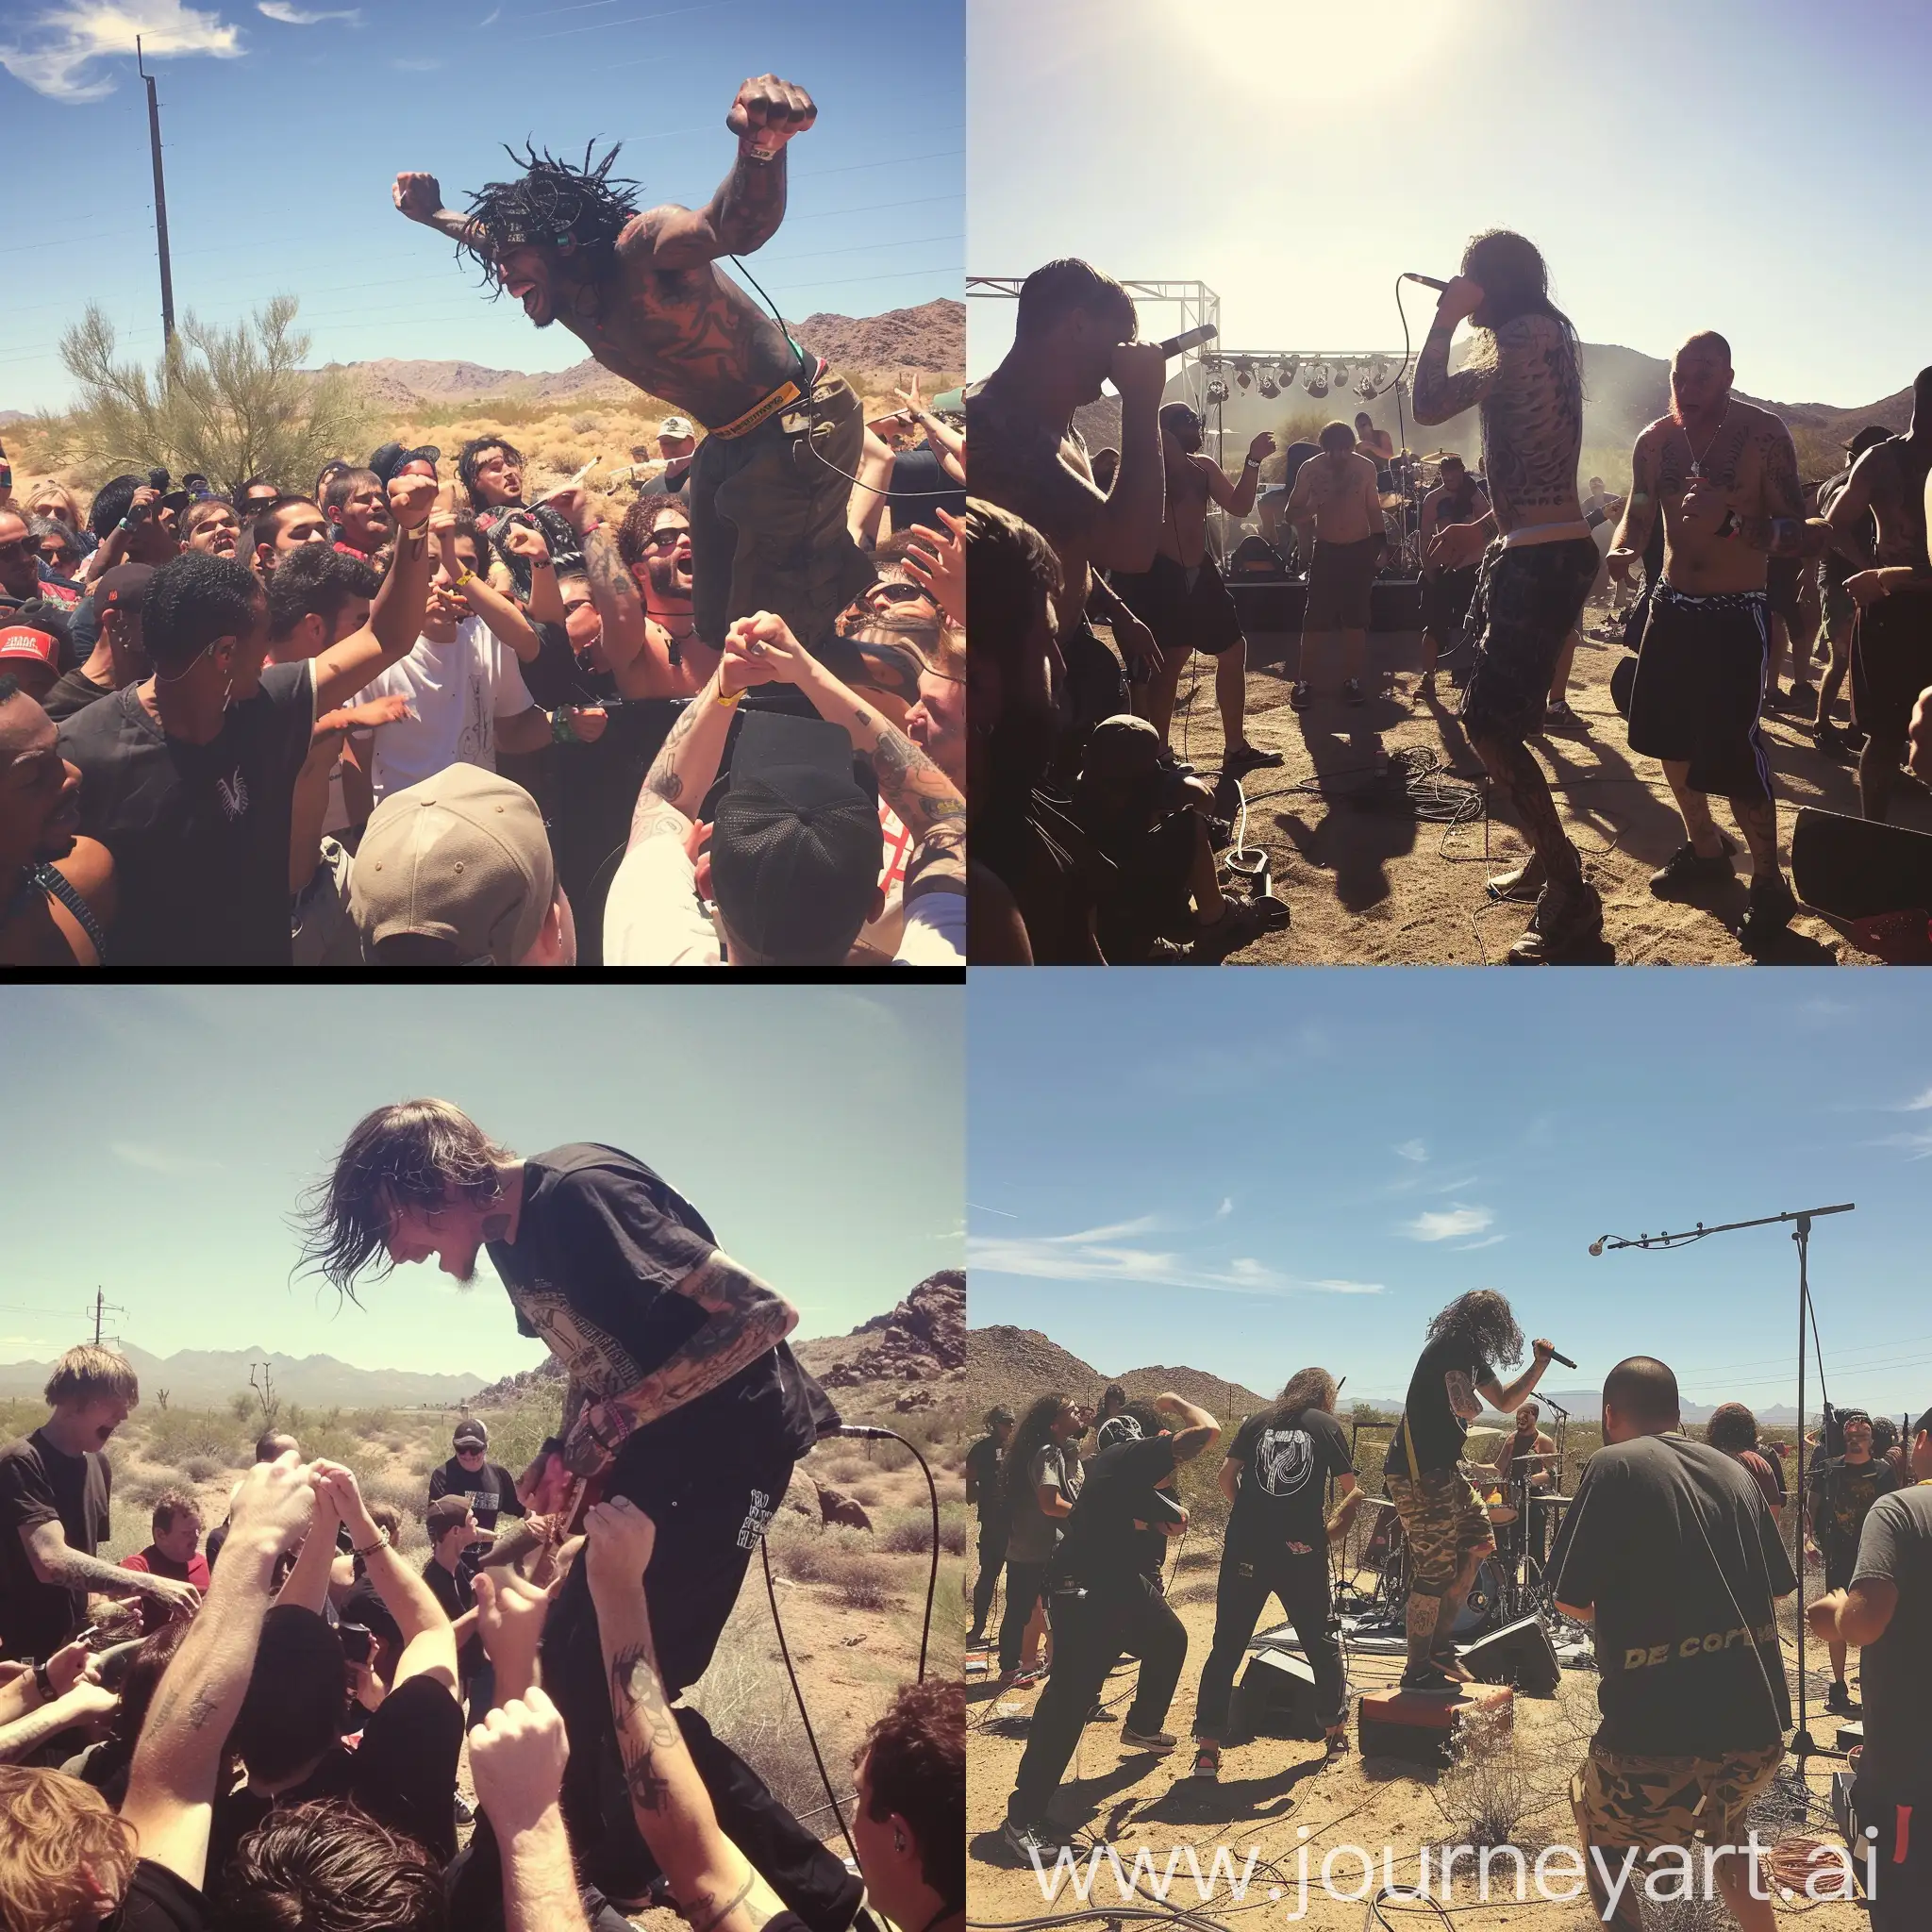 Death-Grips-Live-Performance-in-Arizona-Desert-Noisy-Amateur-Concert-Picture-with-Broad-Daylight-Moshpit